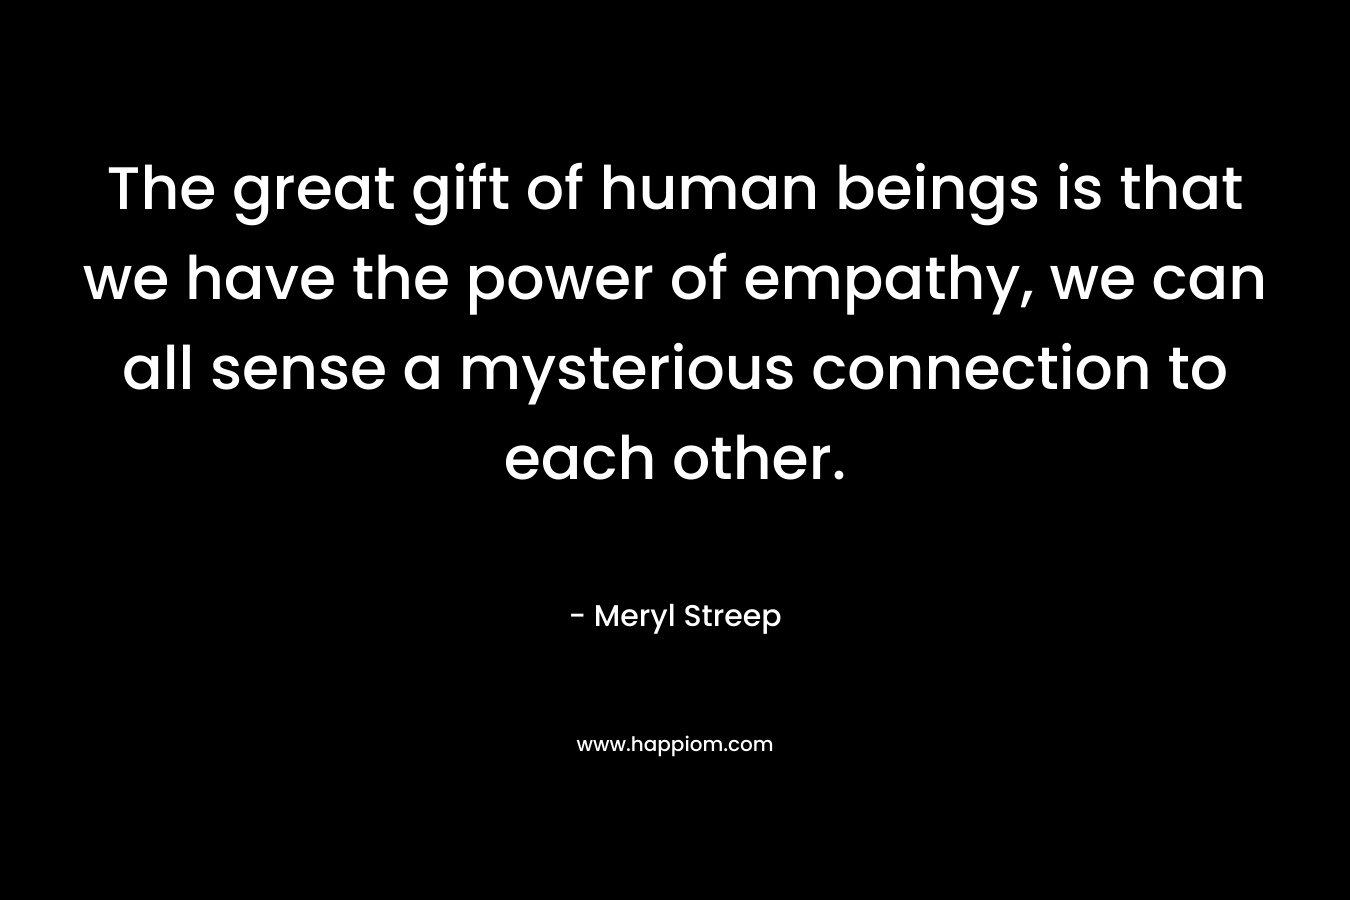 The great gift of human beings is that we have the power of empathy, we can all sense a mysterious connection to each other. – Meryl Streep